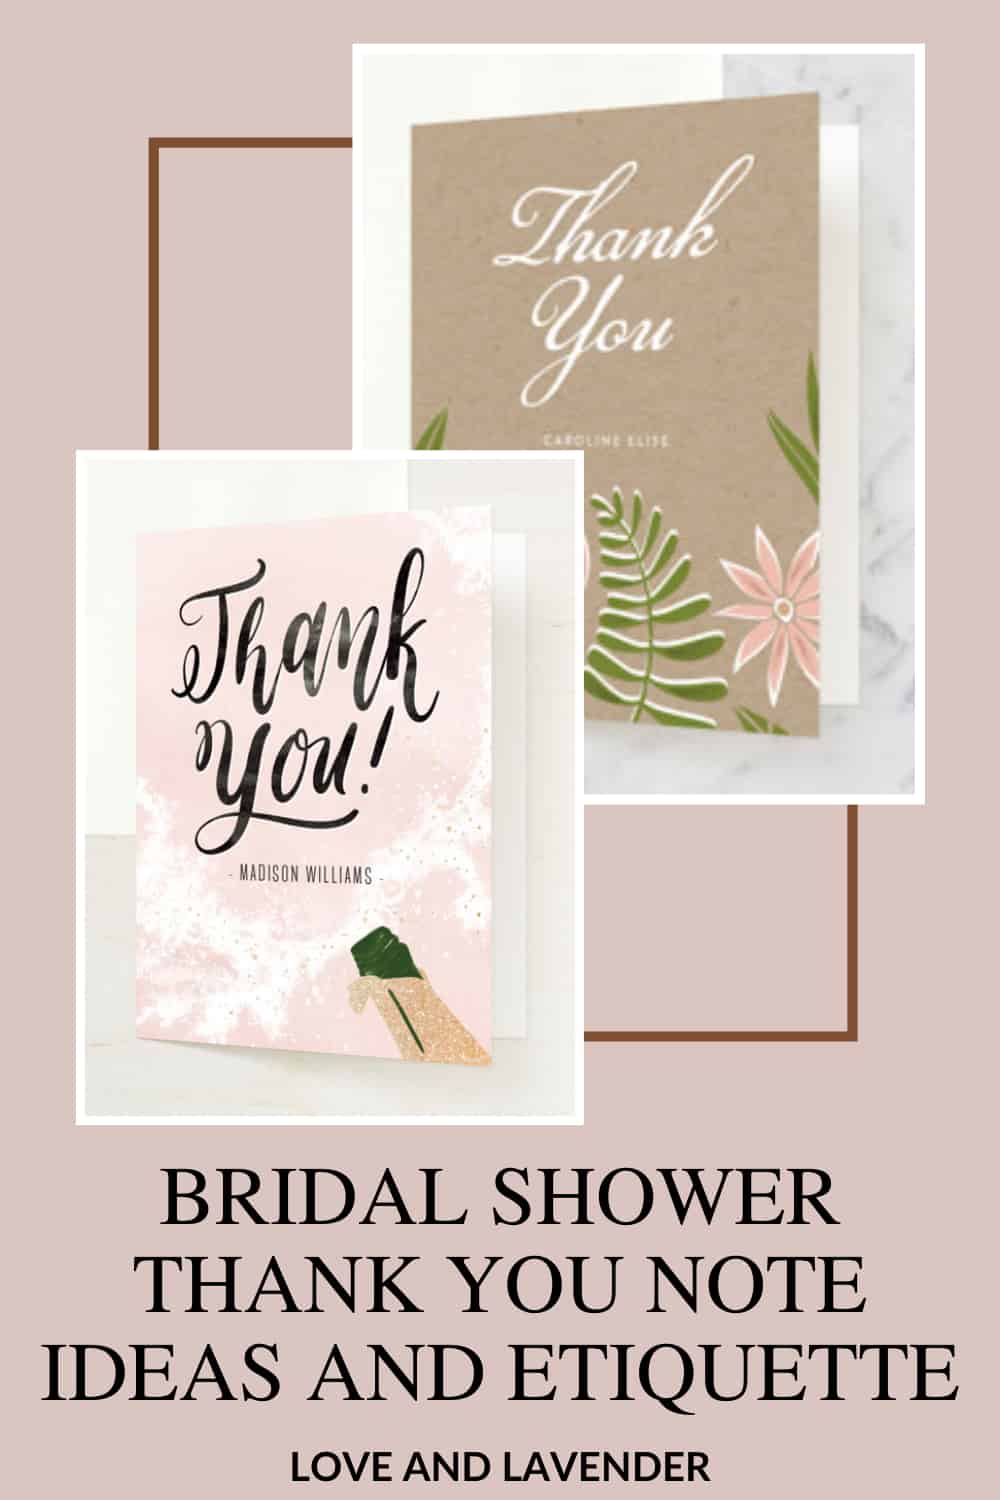 11 Thoughtful Bridal Shower Thank You Cards + Helpful Wording Ideas